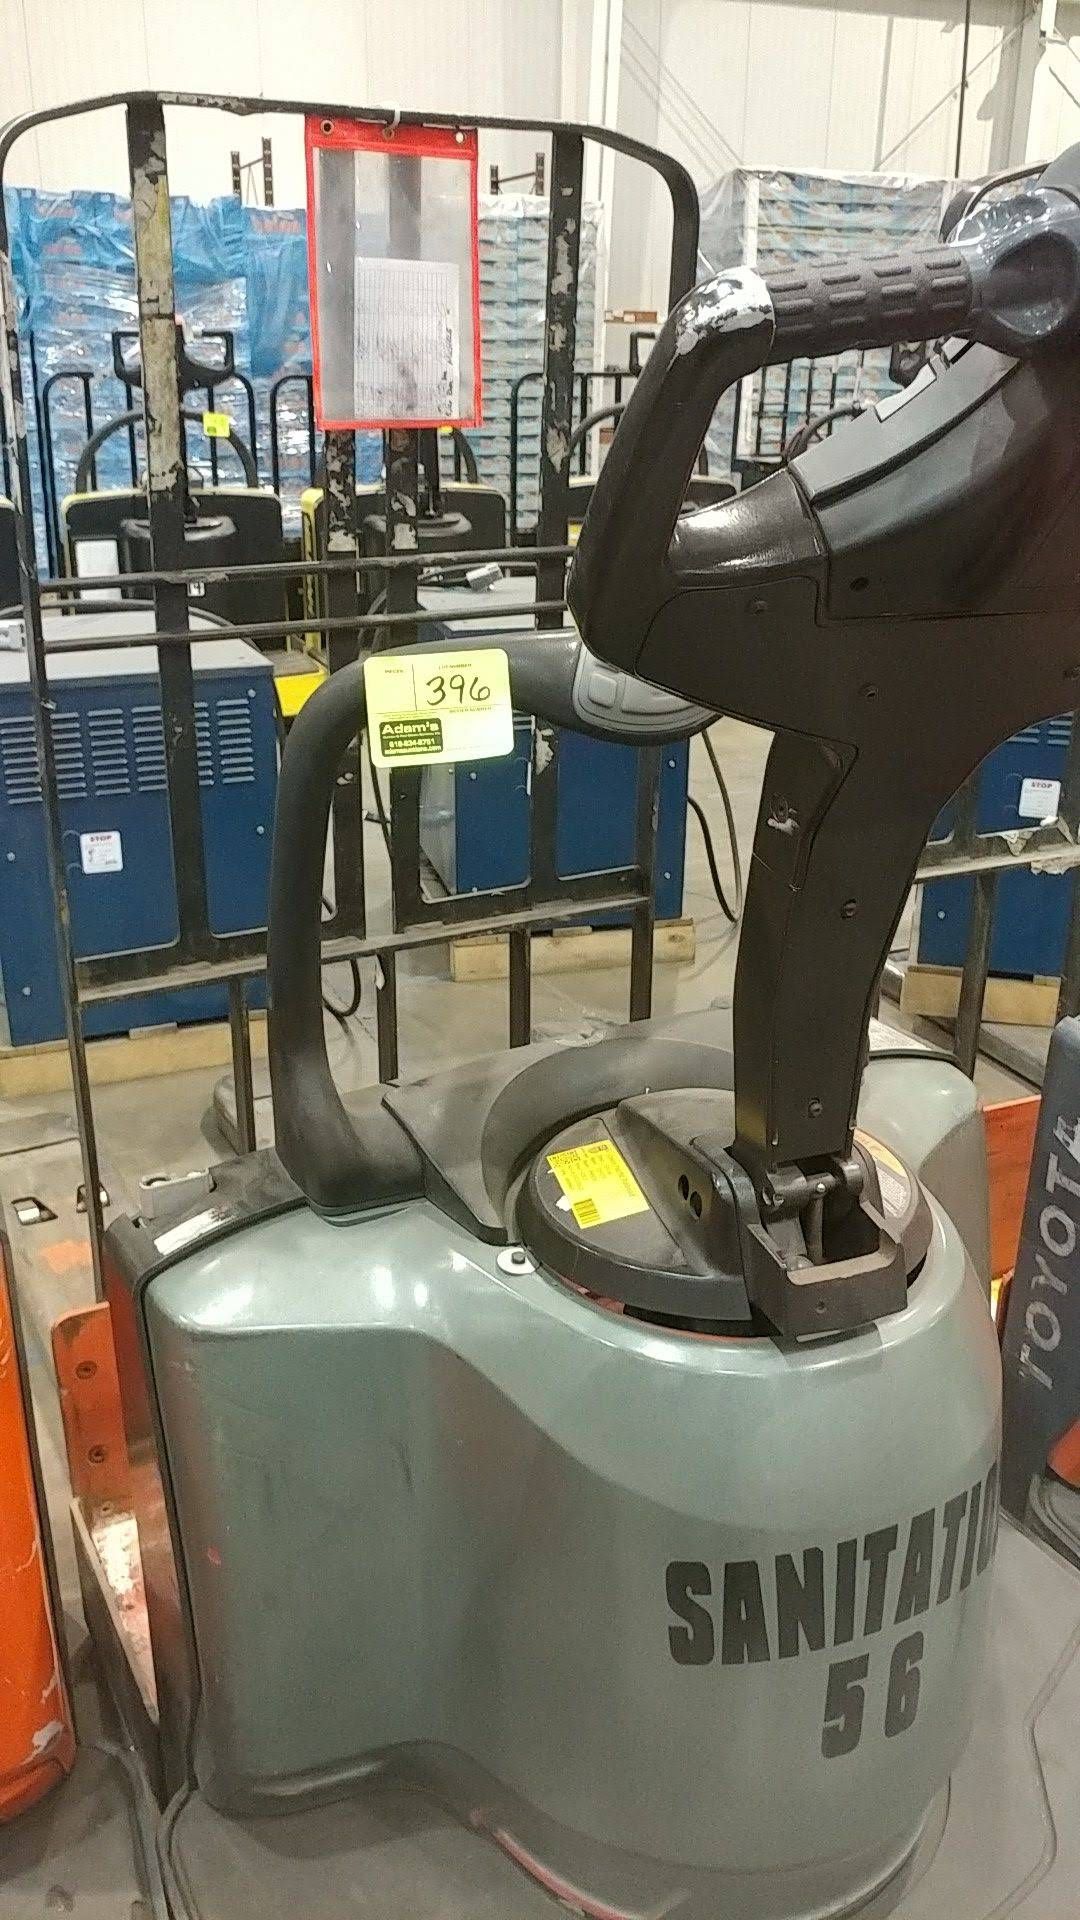 Toyota Pallet jack; Model 8HBE30; Serial Number 42813; 8328 hours with Northeast Battery Charger